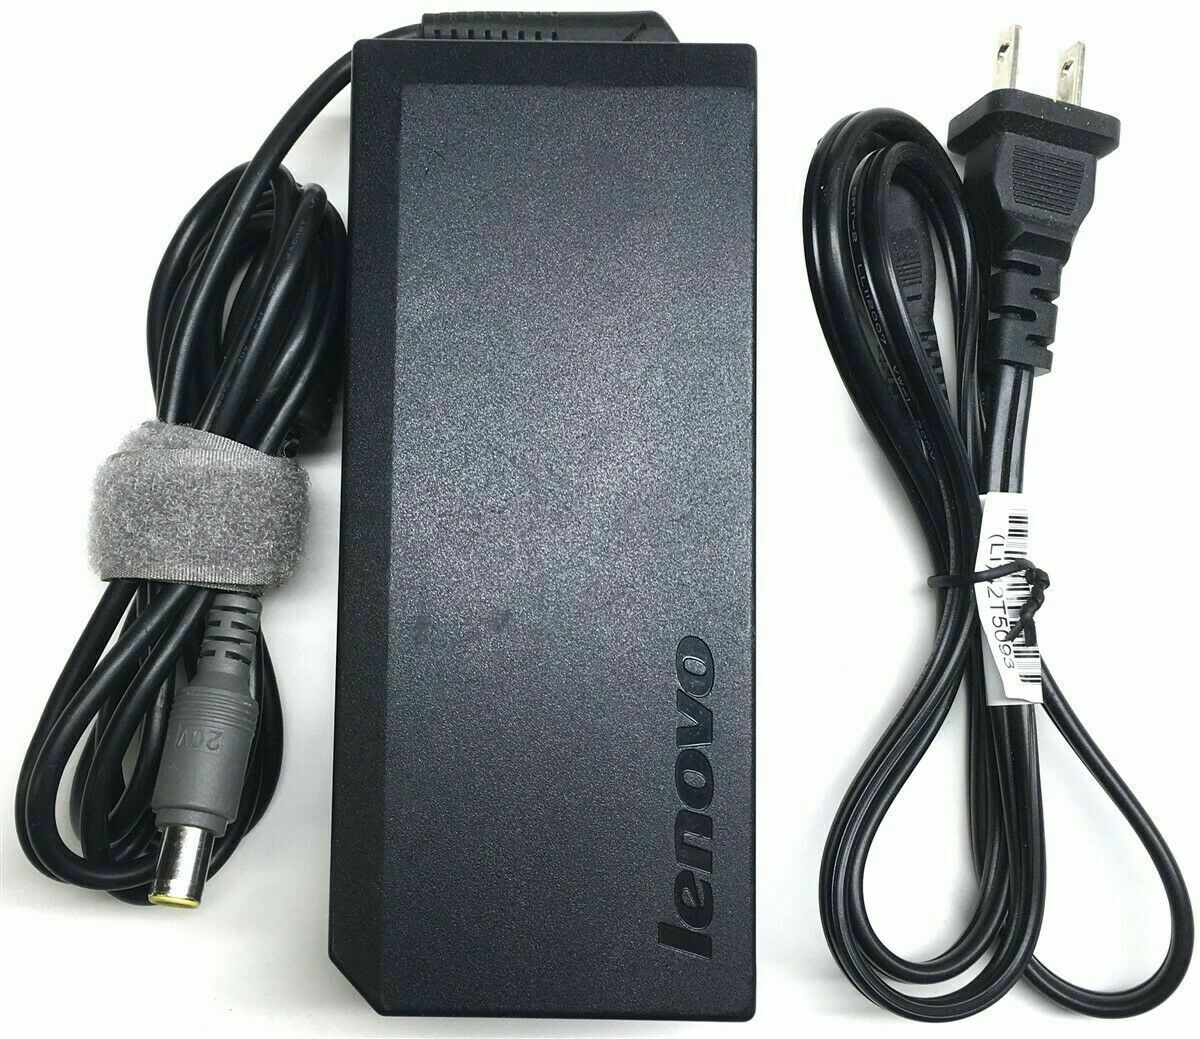 Power Adapter for Halfords Power Pack 100 Powerpack 200 Booster, 5.5*2.5 Charger/ Power Adapter for 12v Car/ Van/ Cara